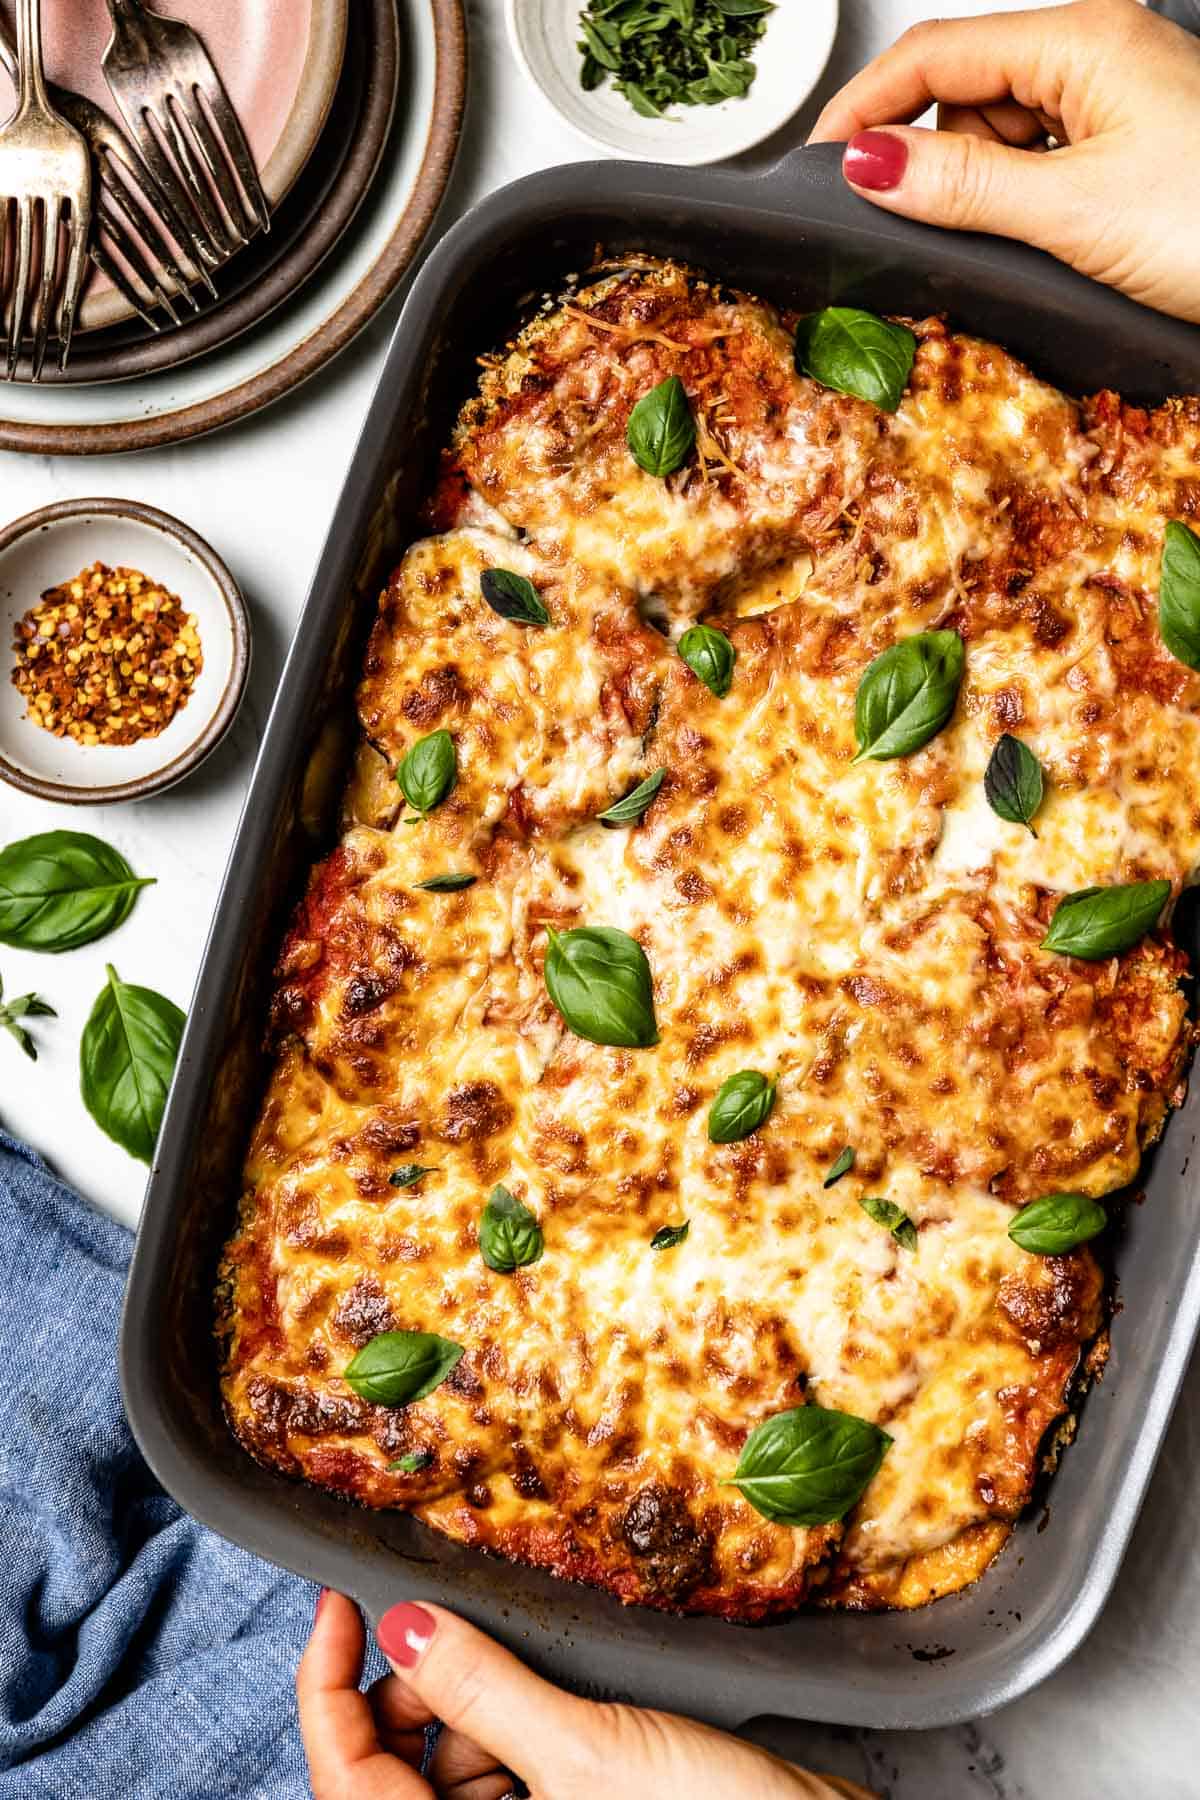 Easy baked eggplant parmesan in a casserole dish from the top view.